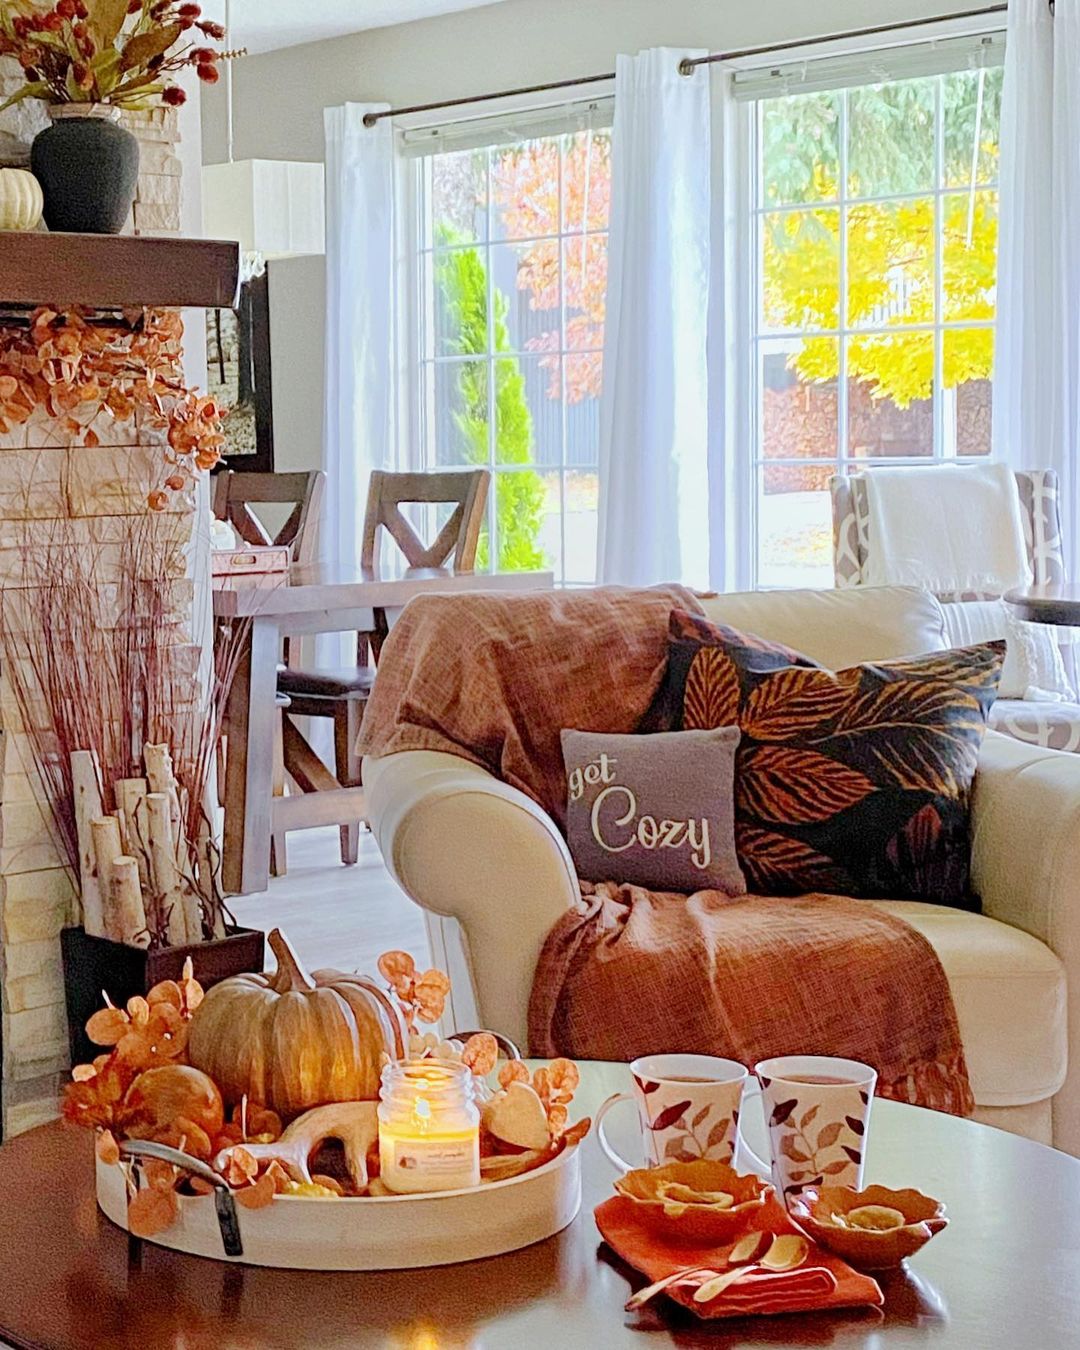 Seasonal Transitions: 5 Tips for Decorating Your Home Throughout the Year